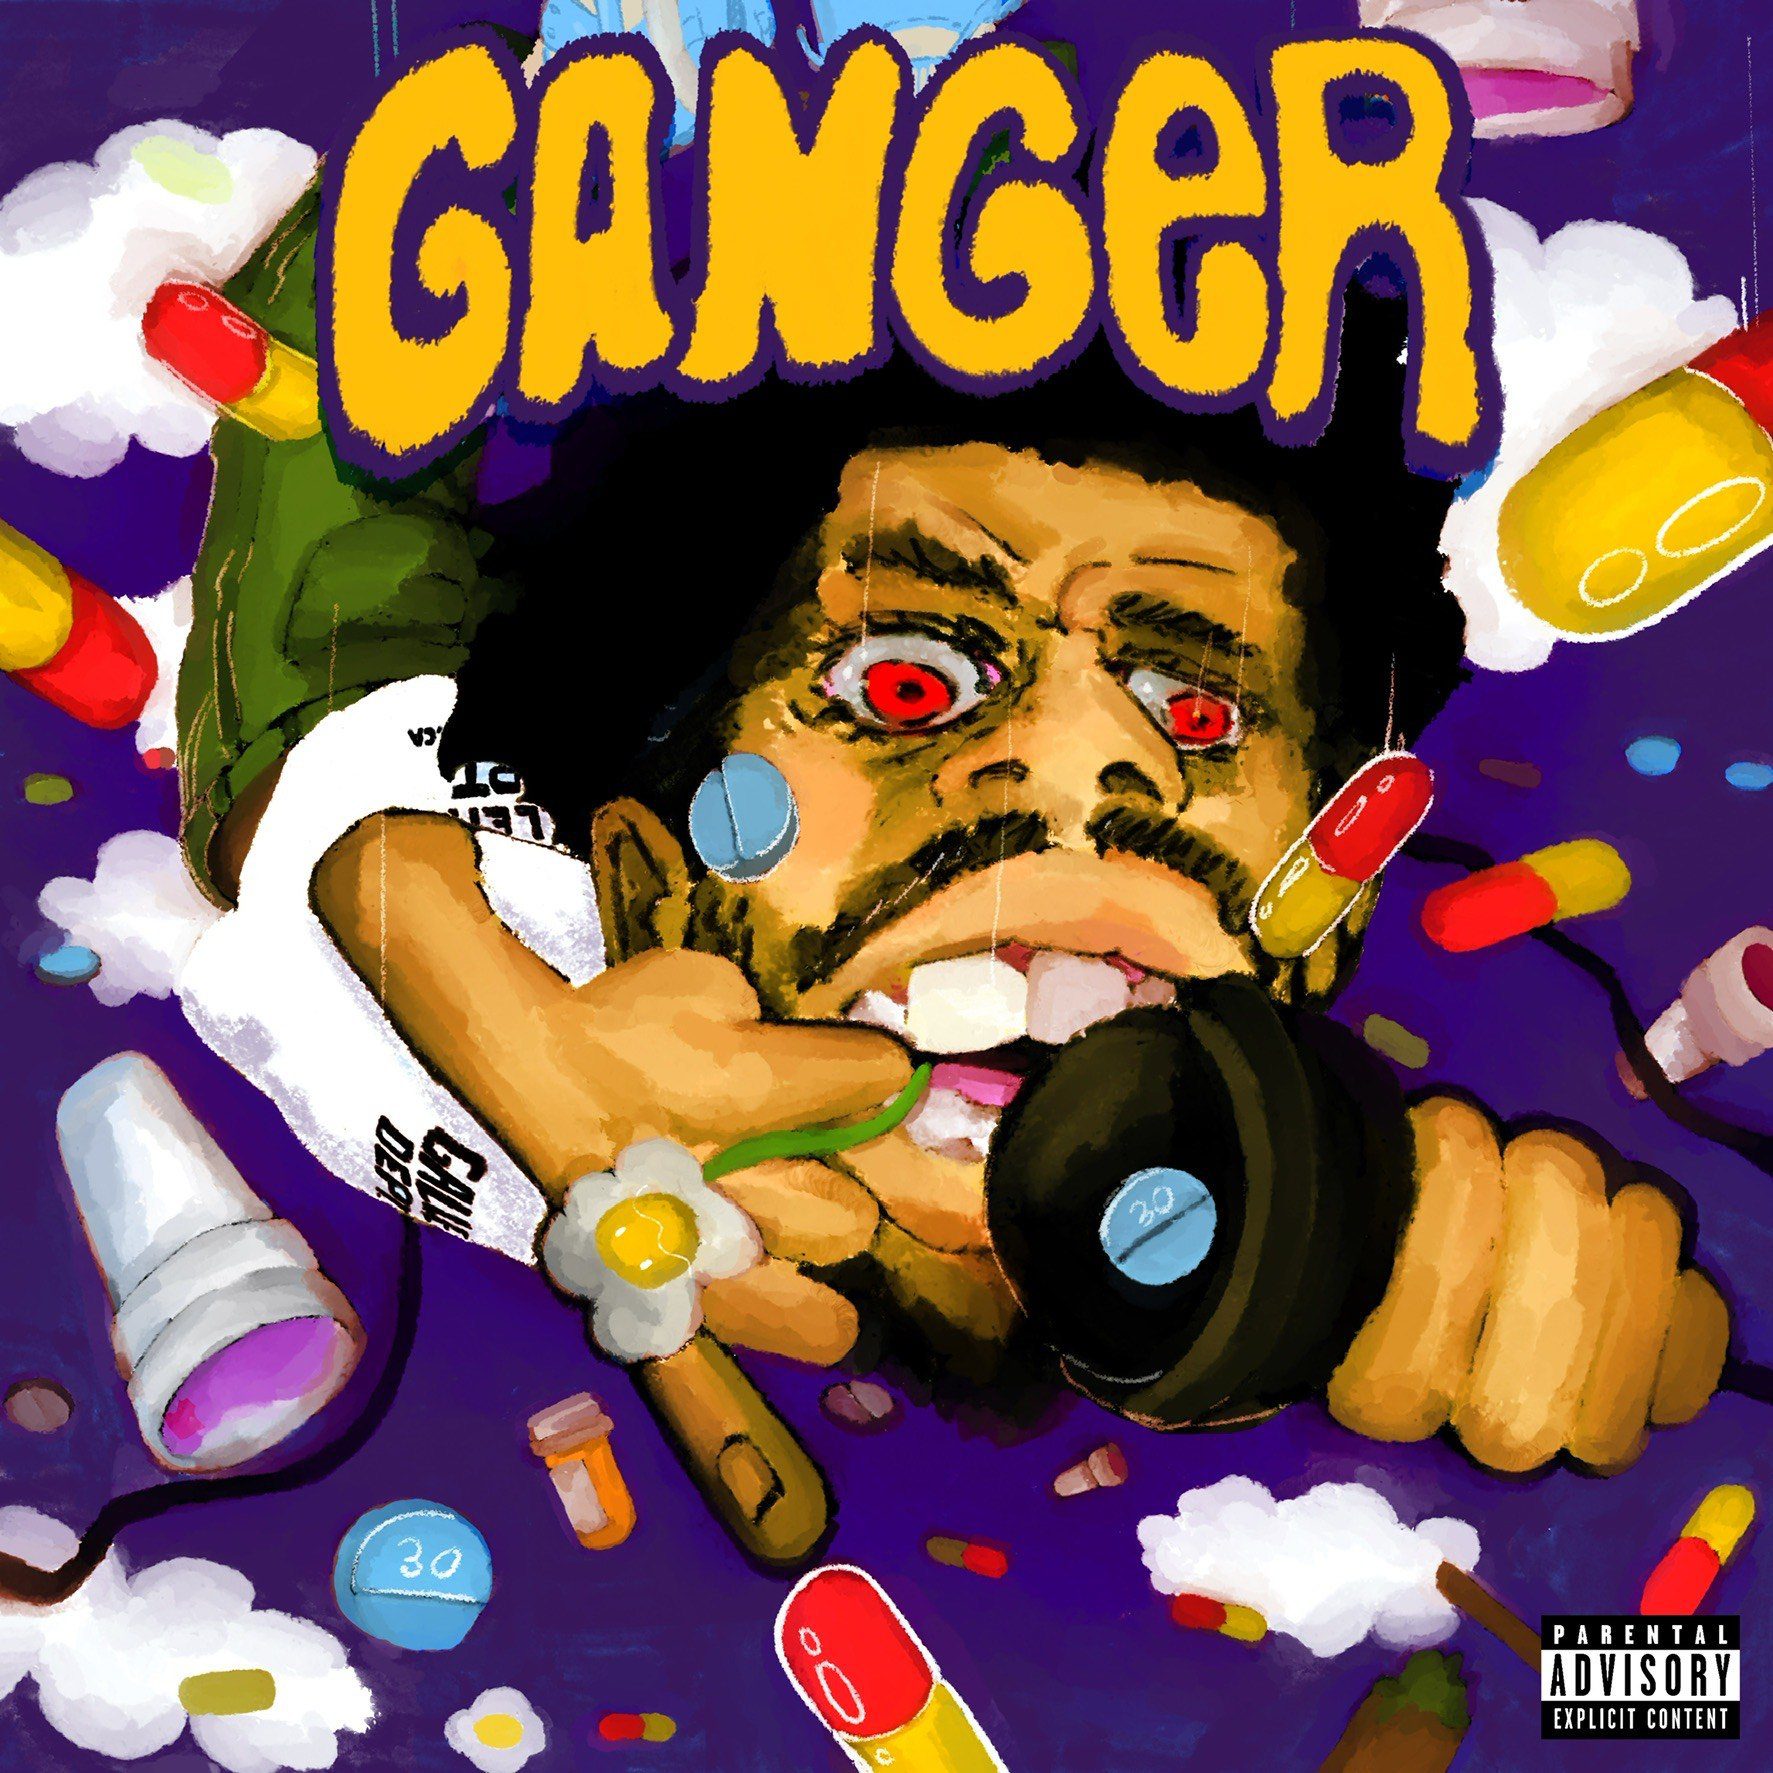 Veeze, the enigmatic Detroit rapper, has just announced the upcoming deluxe version of his critically acclaimed debut album Ganger – out this Friday, October 13th via 360 MAGAZINE.